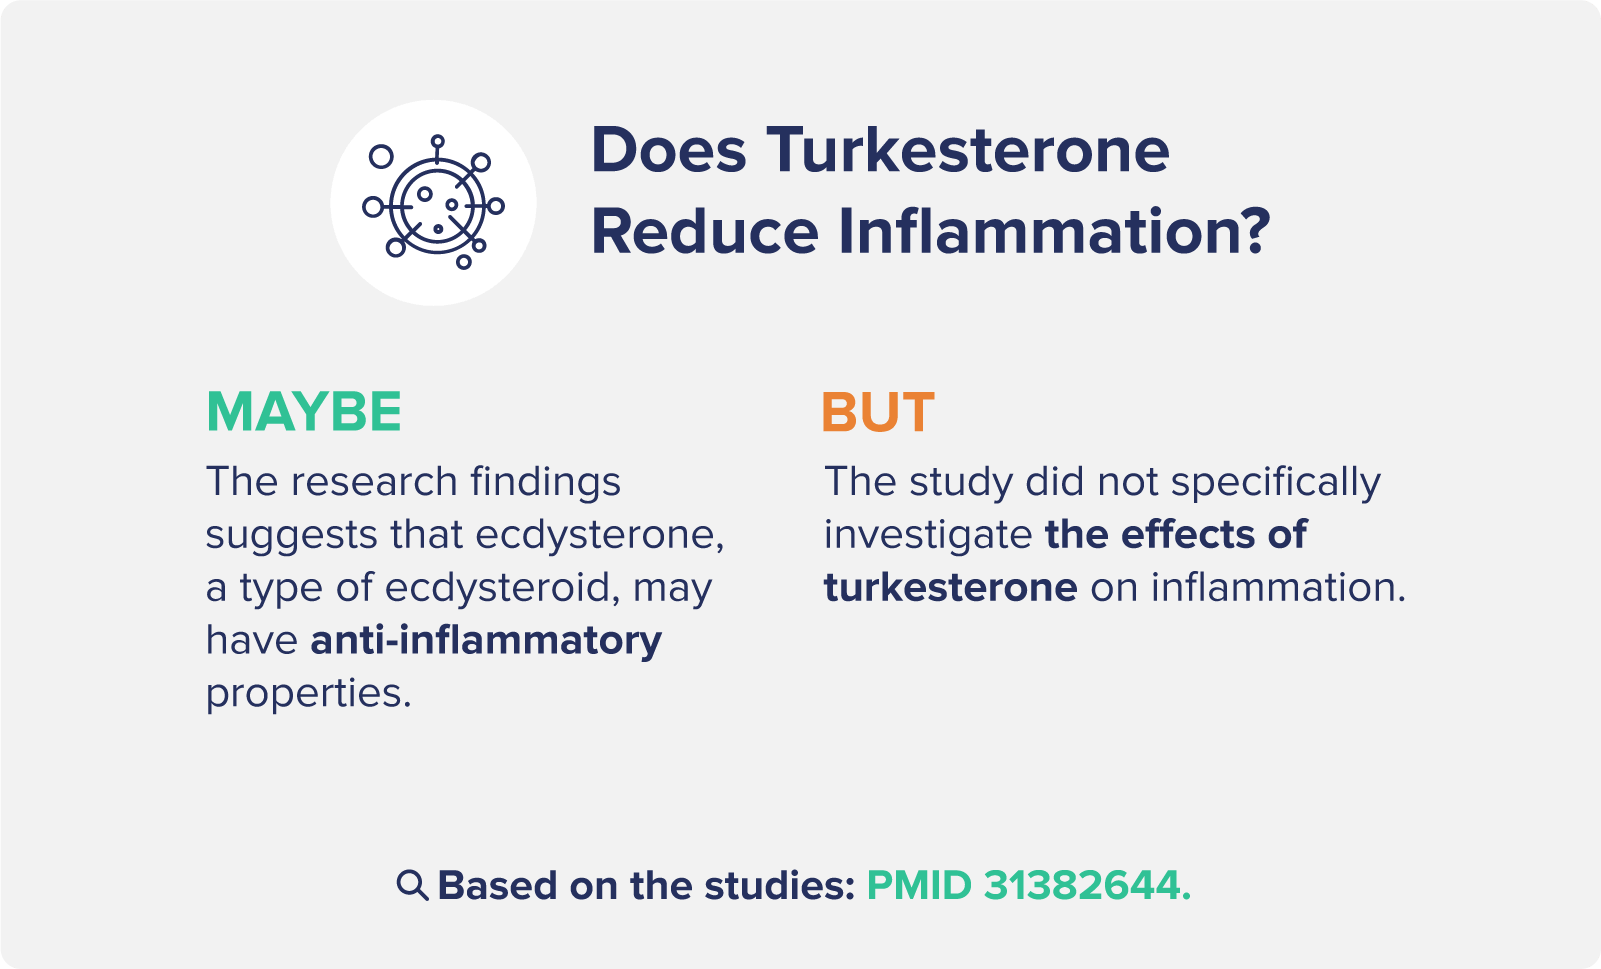 Does Turkesterone Reduce Inflammation